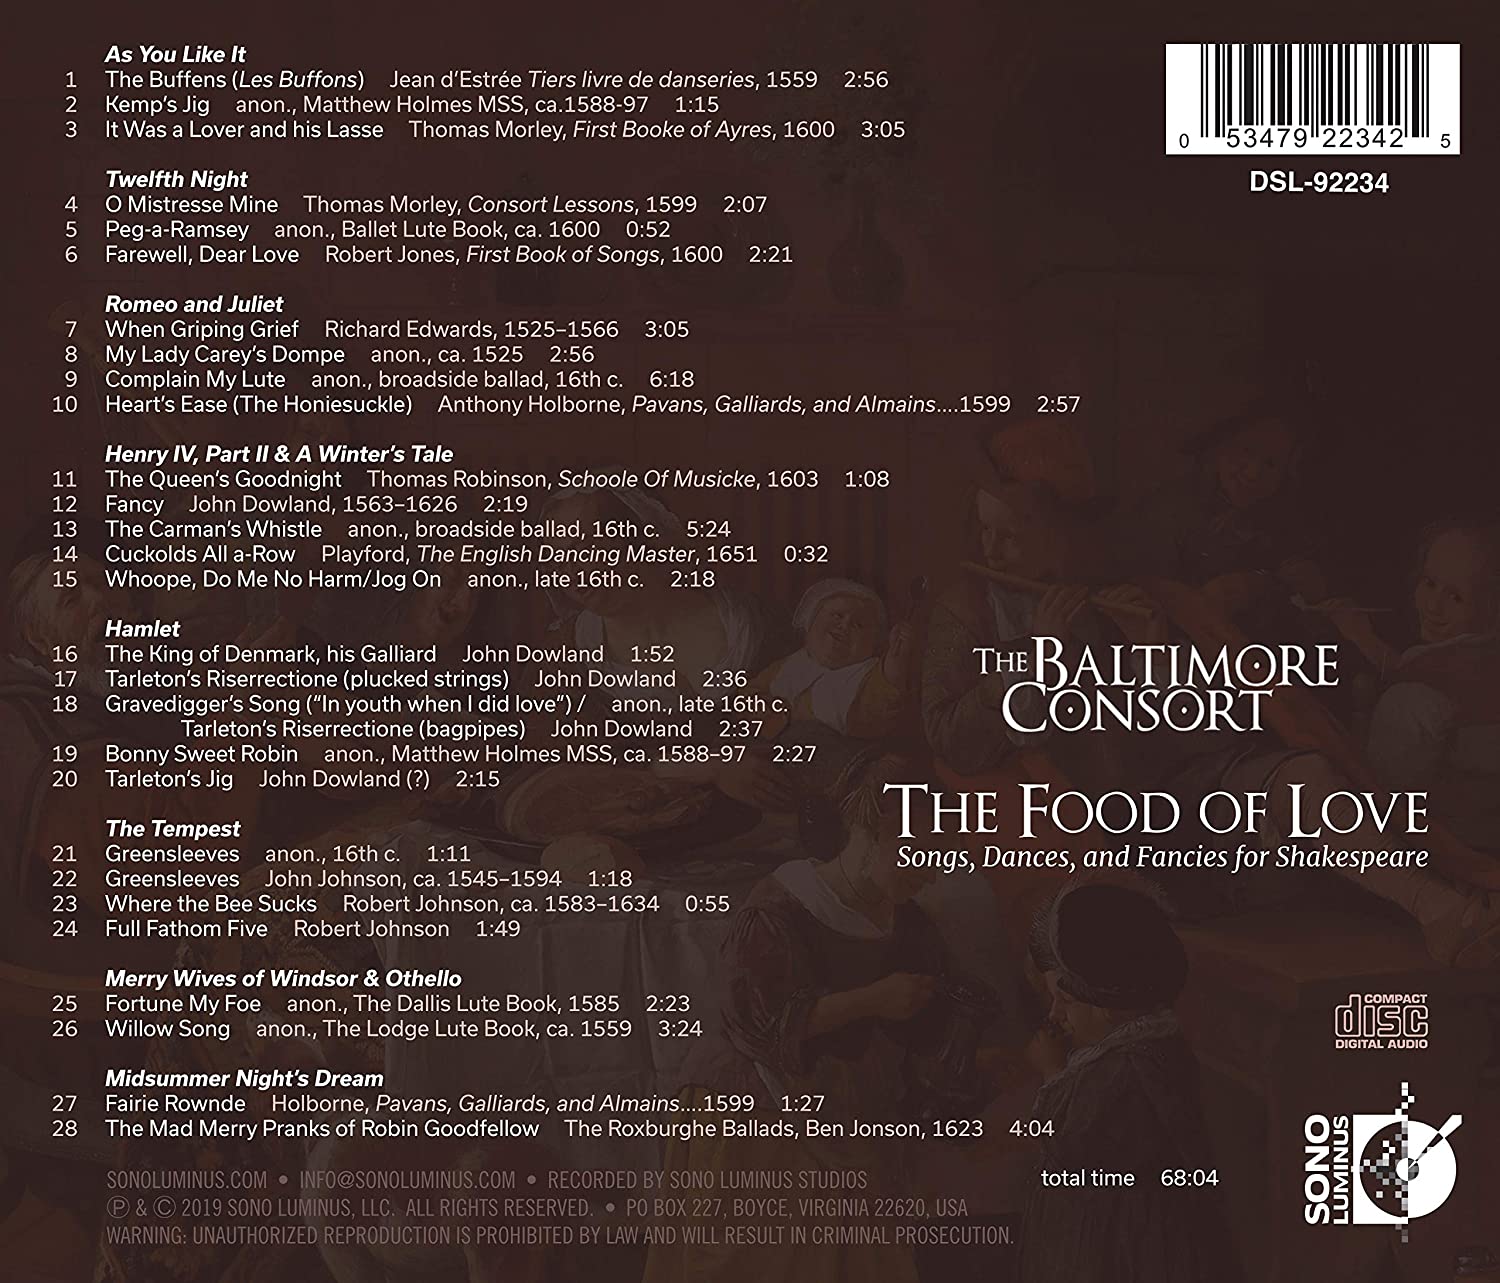 The Food of Love: Songs, Dances and Fancies for Shakespeare - slide-1